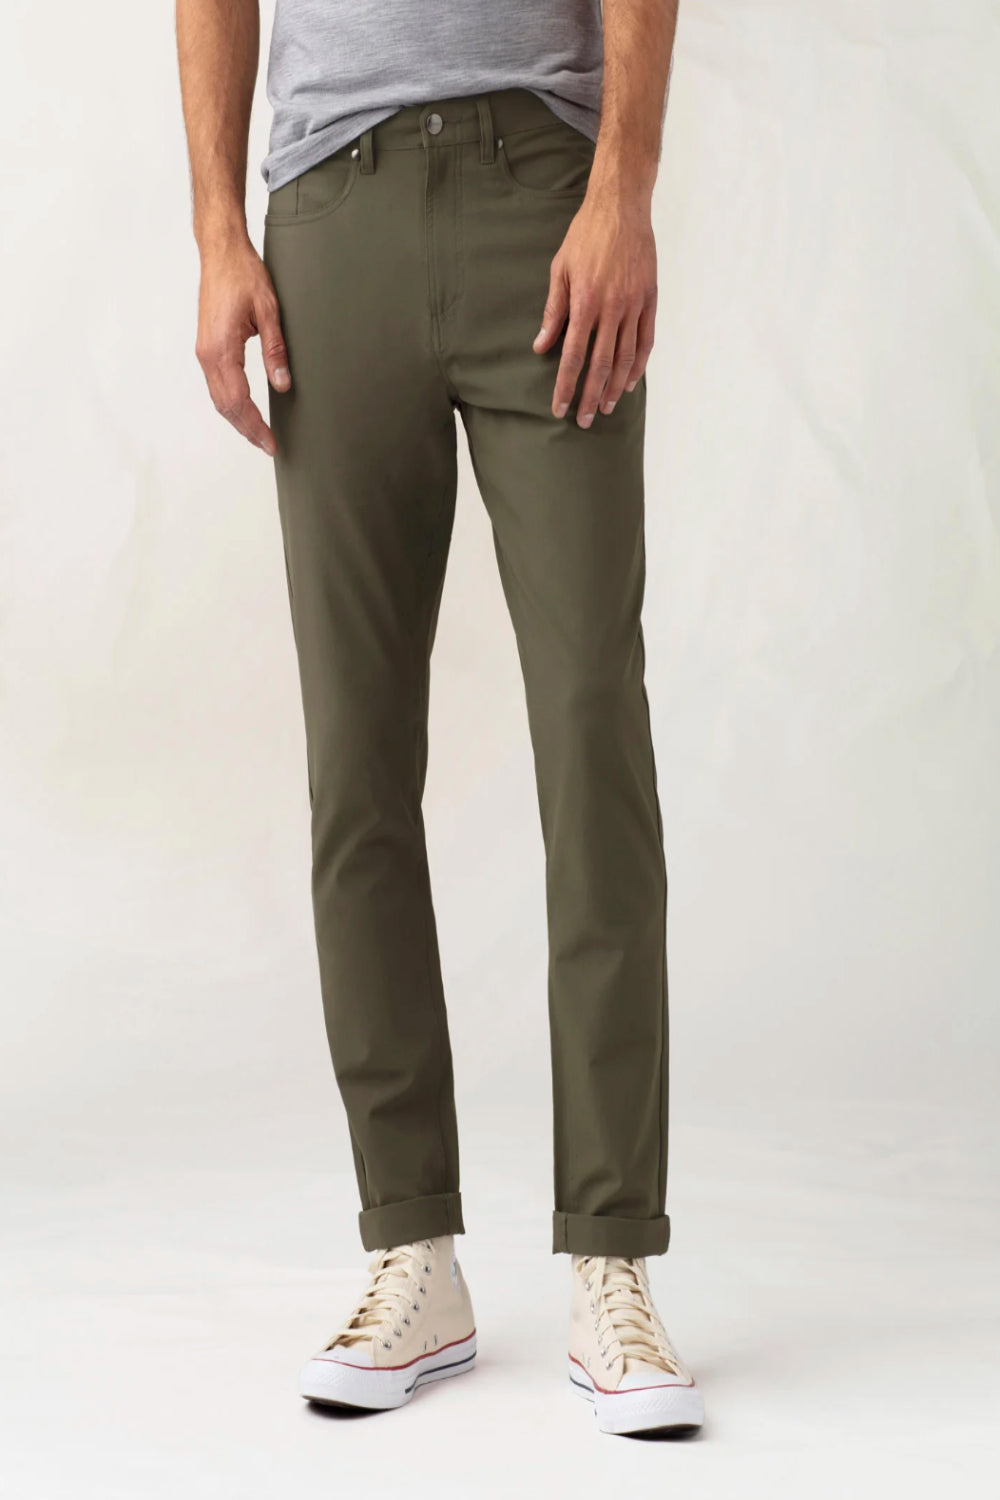 Passage Pant Military Olive